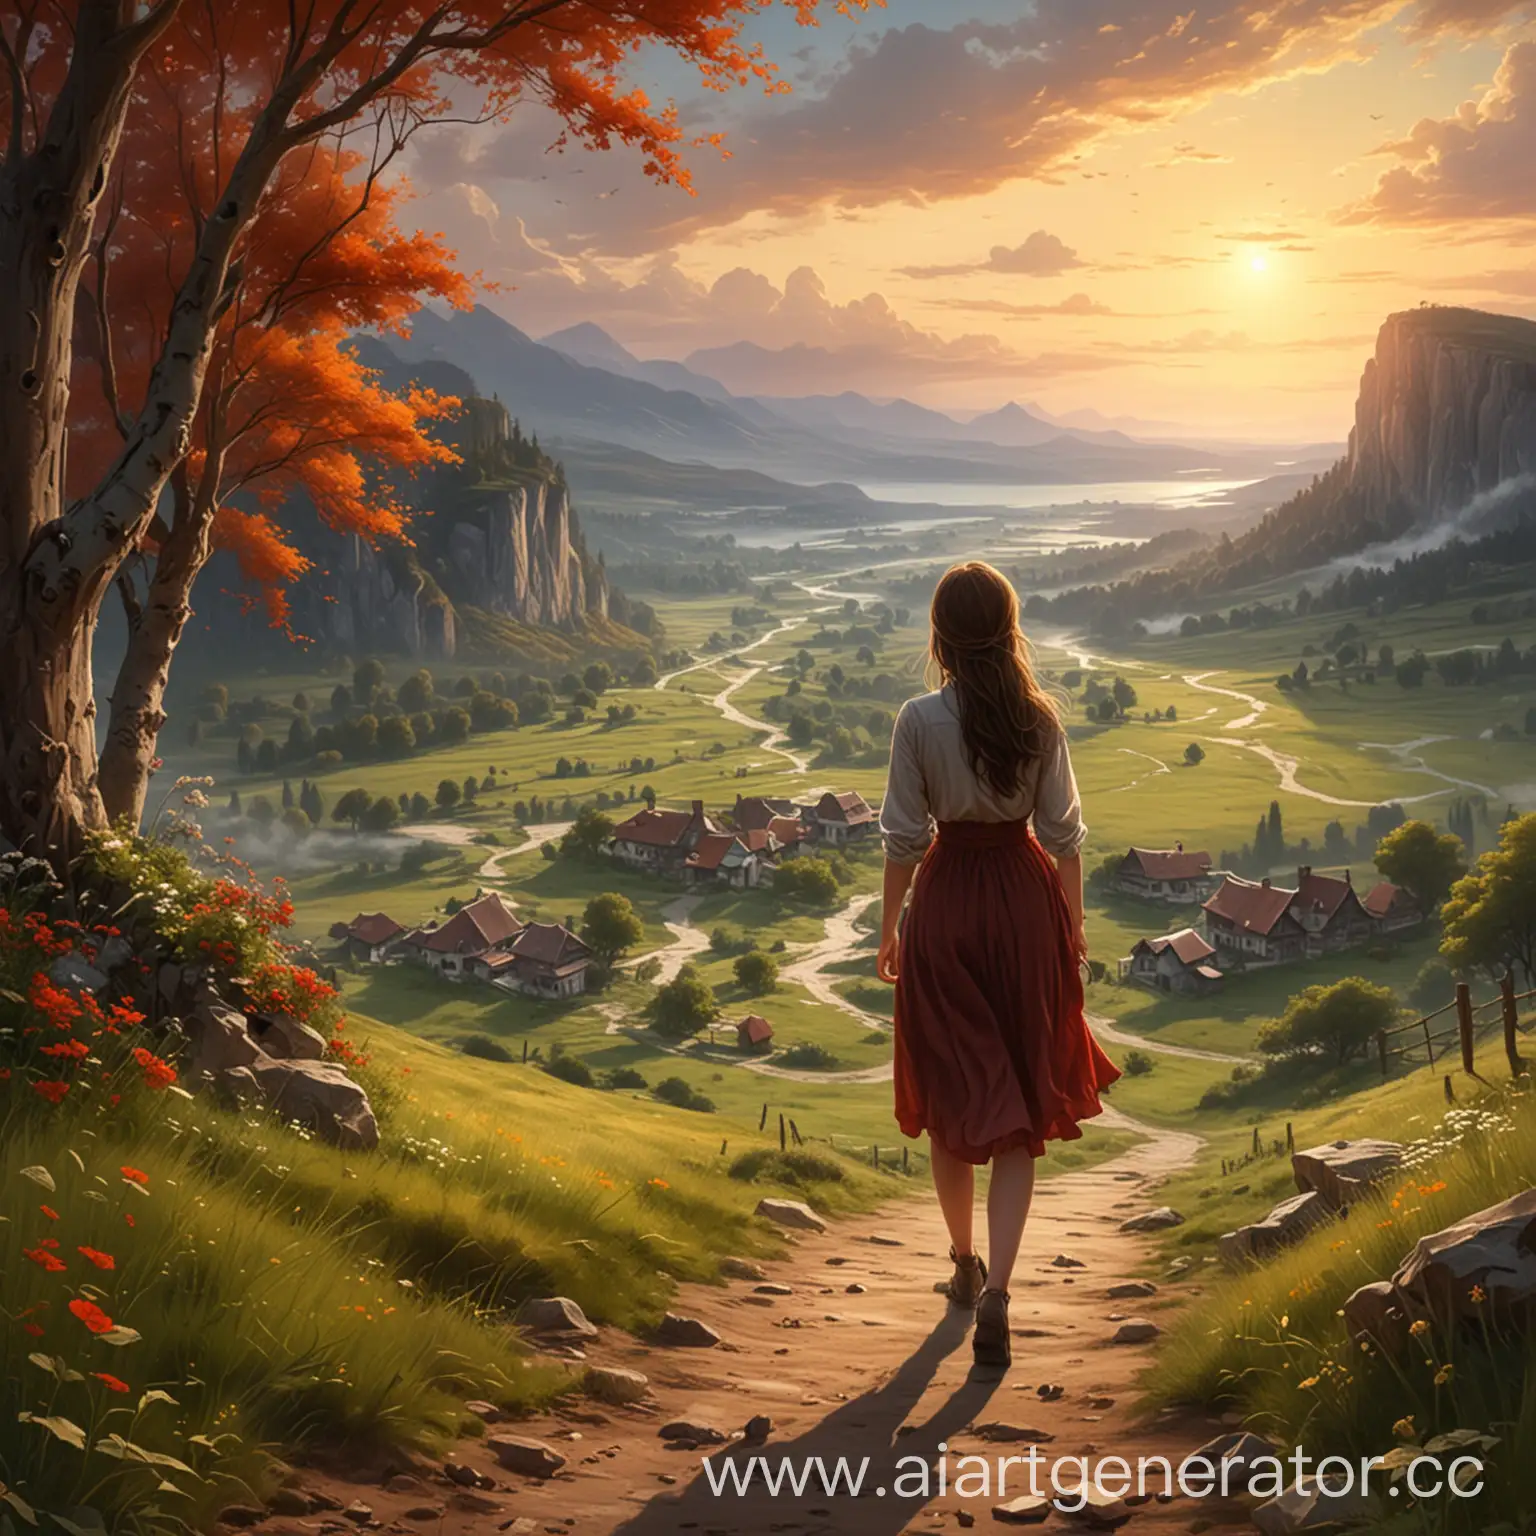 Bidding-Farewell-with-a-Beautiful-Girl-Amidst-Stunning-Landscape